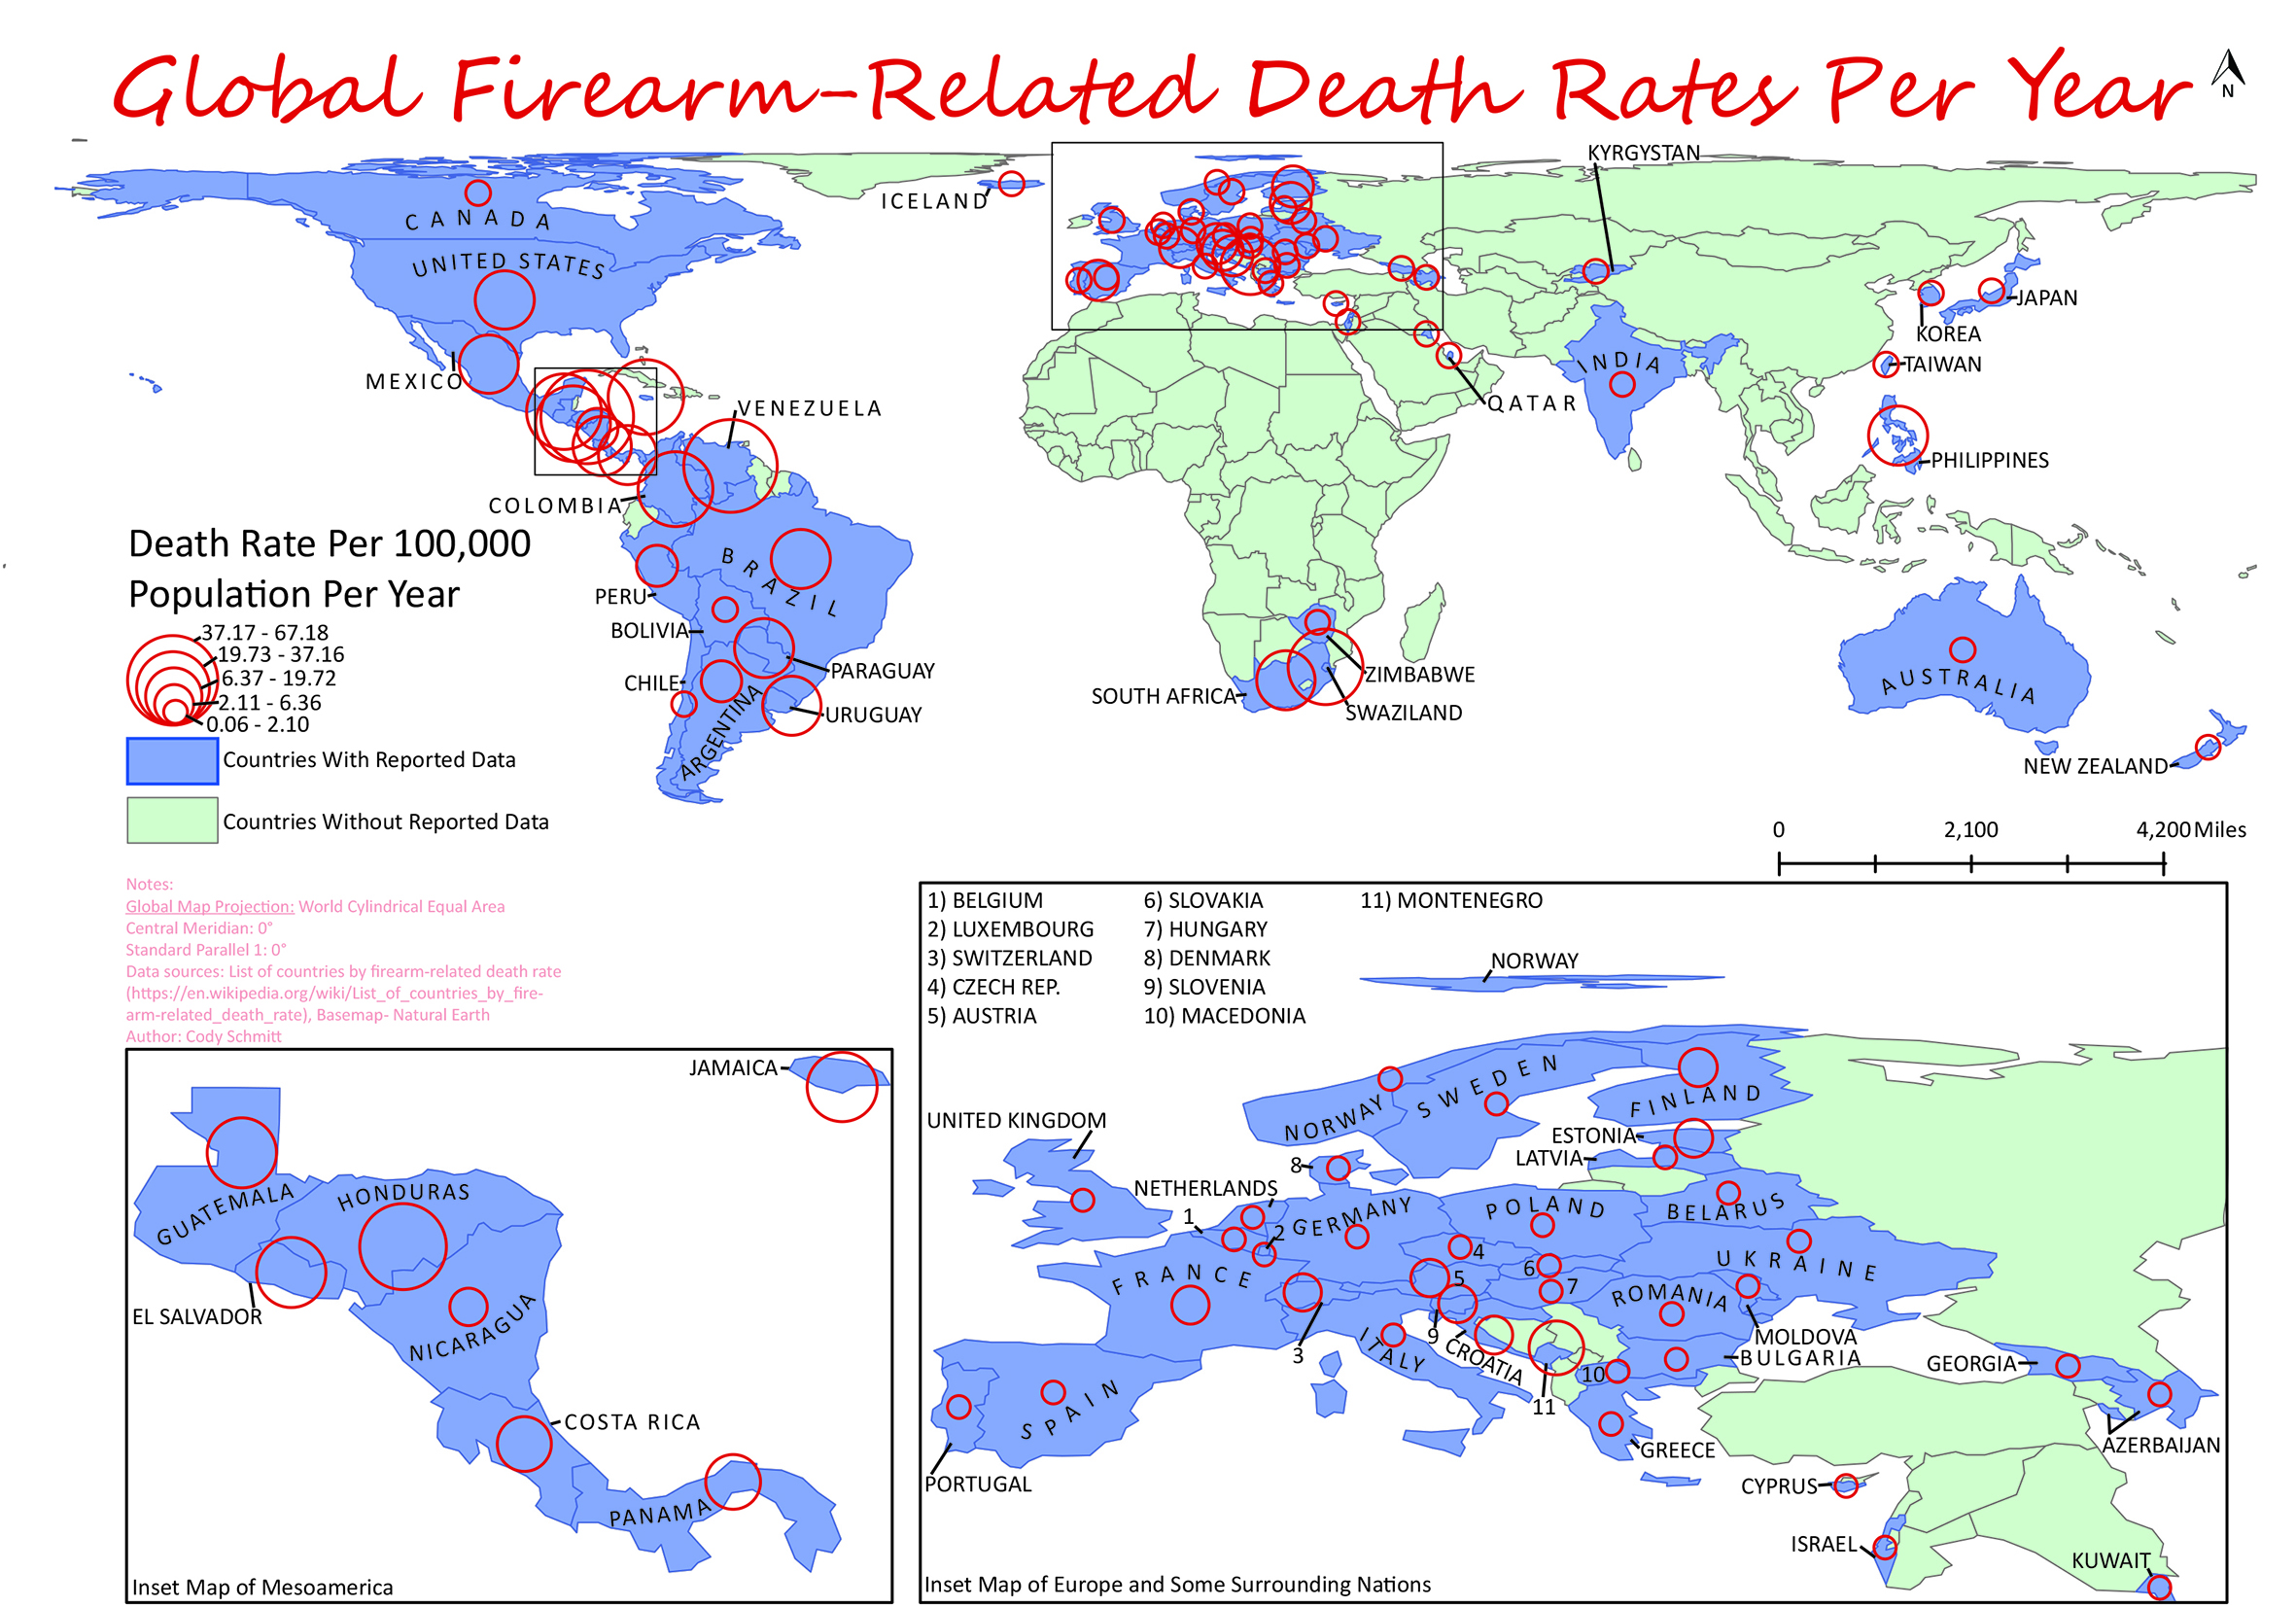 Global Firearm-Related Death Rates Per Year